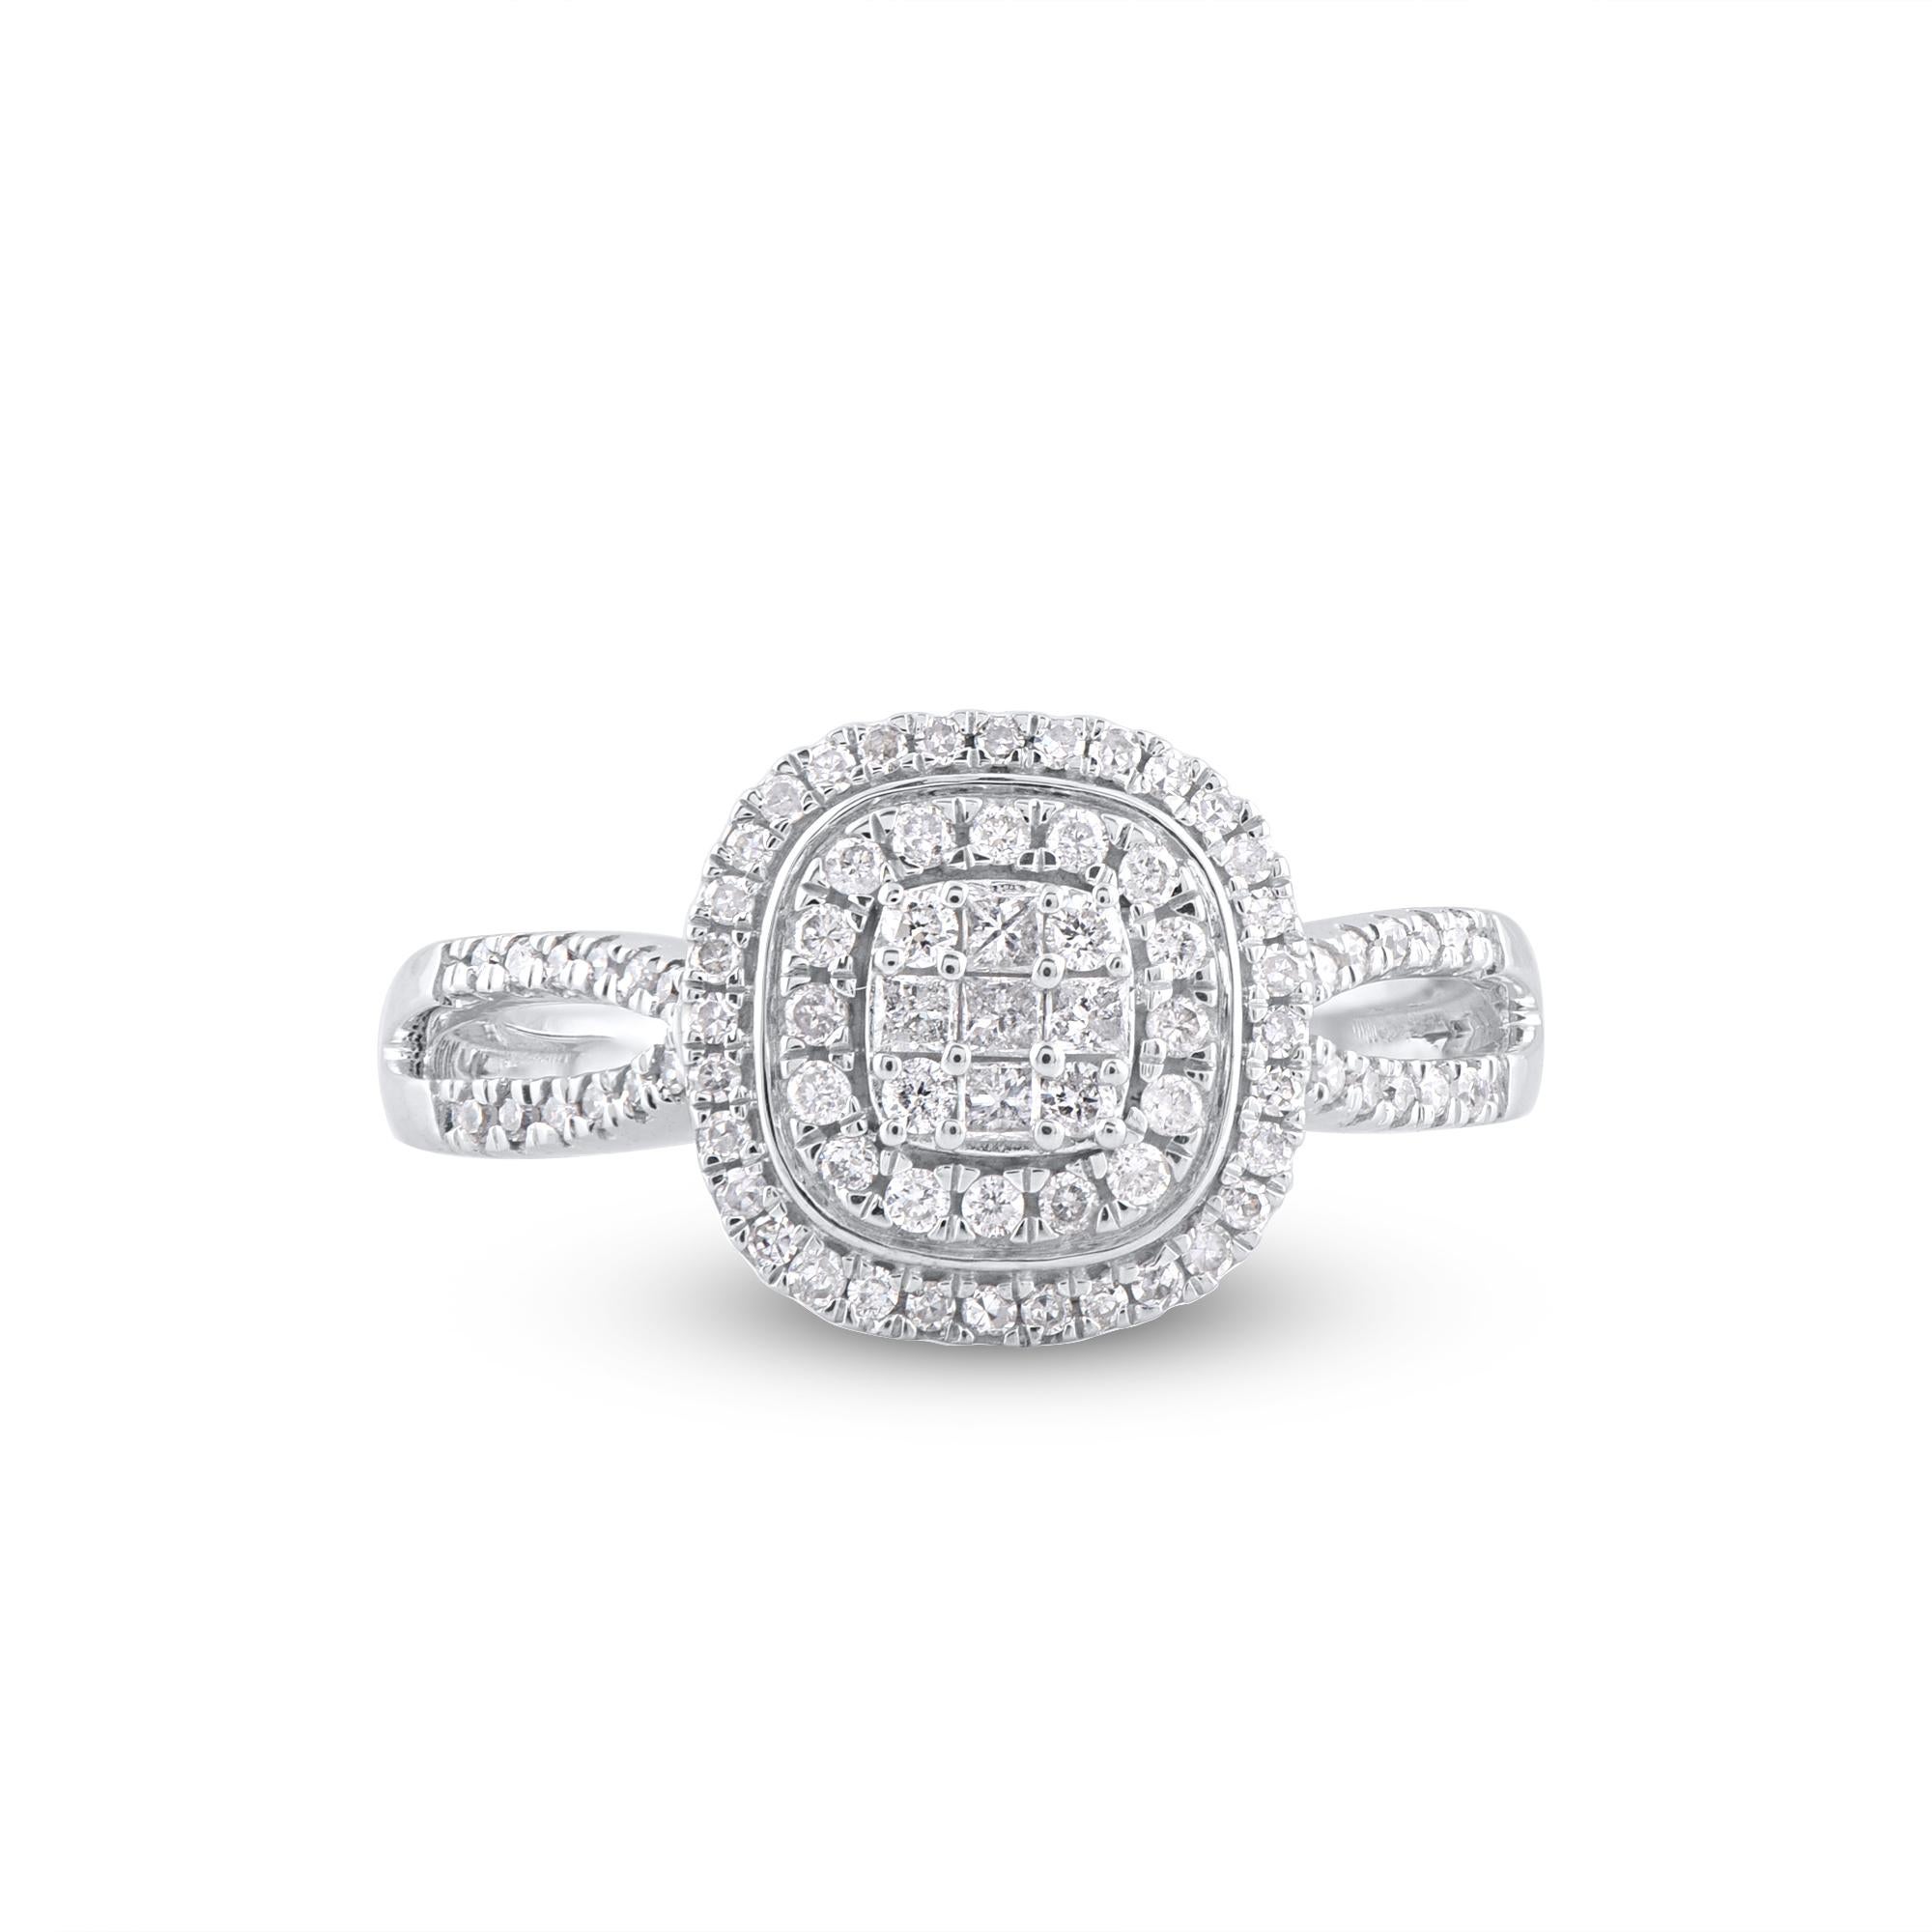 Express your love for her in the most classic way with this diamond ring. Crafted in 14 Karat white gold. This wedding ring features a sparkling 81 princess cut and single cut, brilliant cut round diamond beautifully set in prong setting. The total